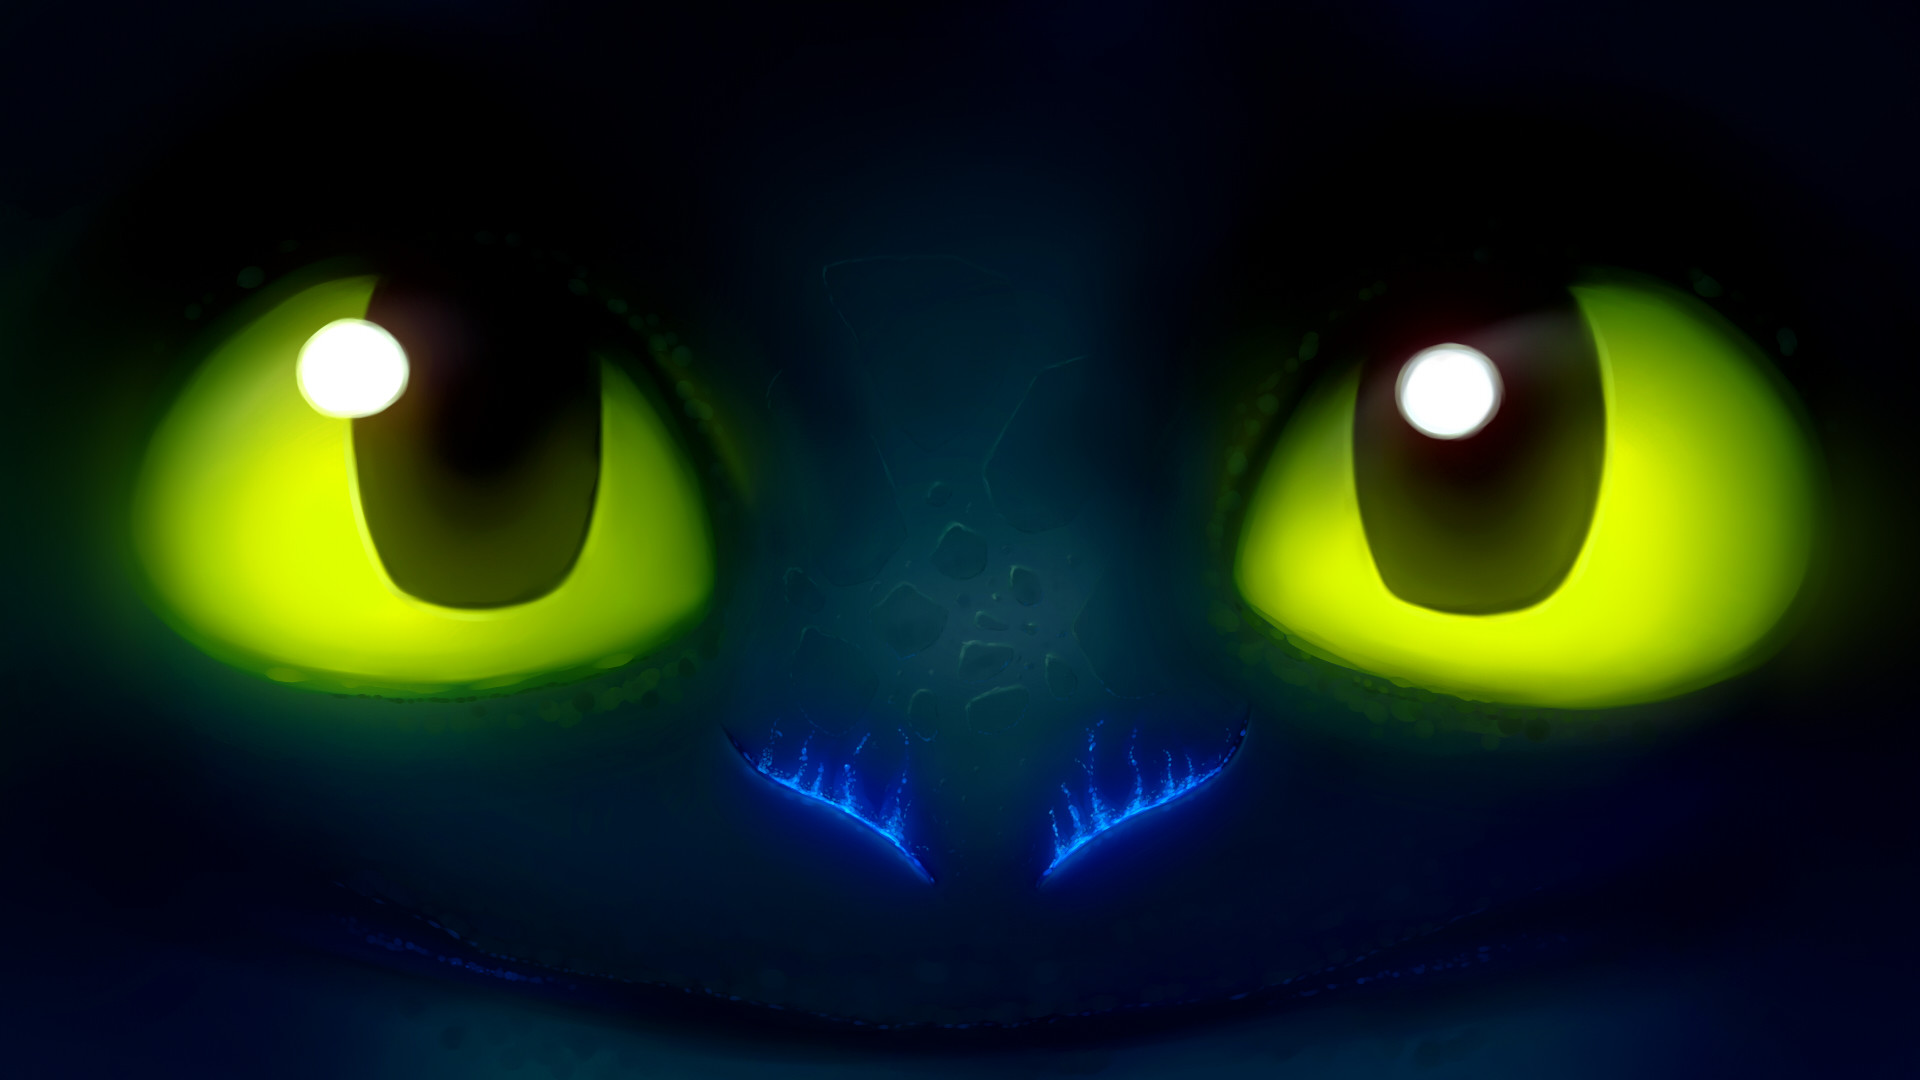 Toothless Wallpaper 1080p By Higemouse On Deviantart 1920x1080